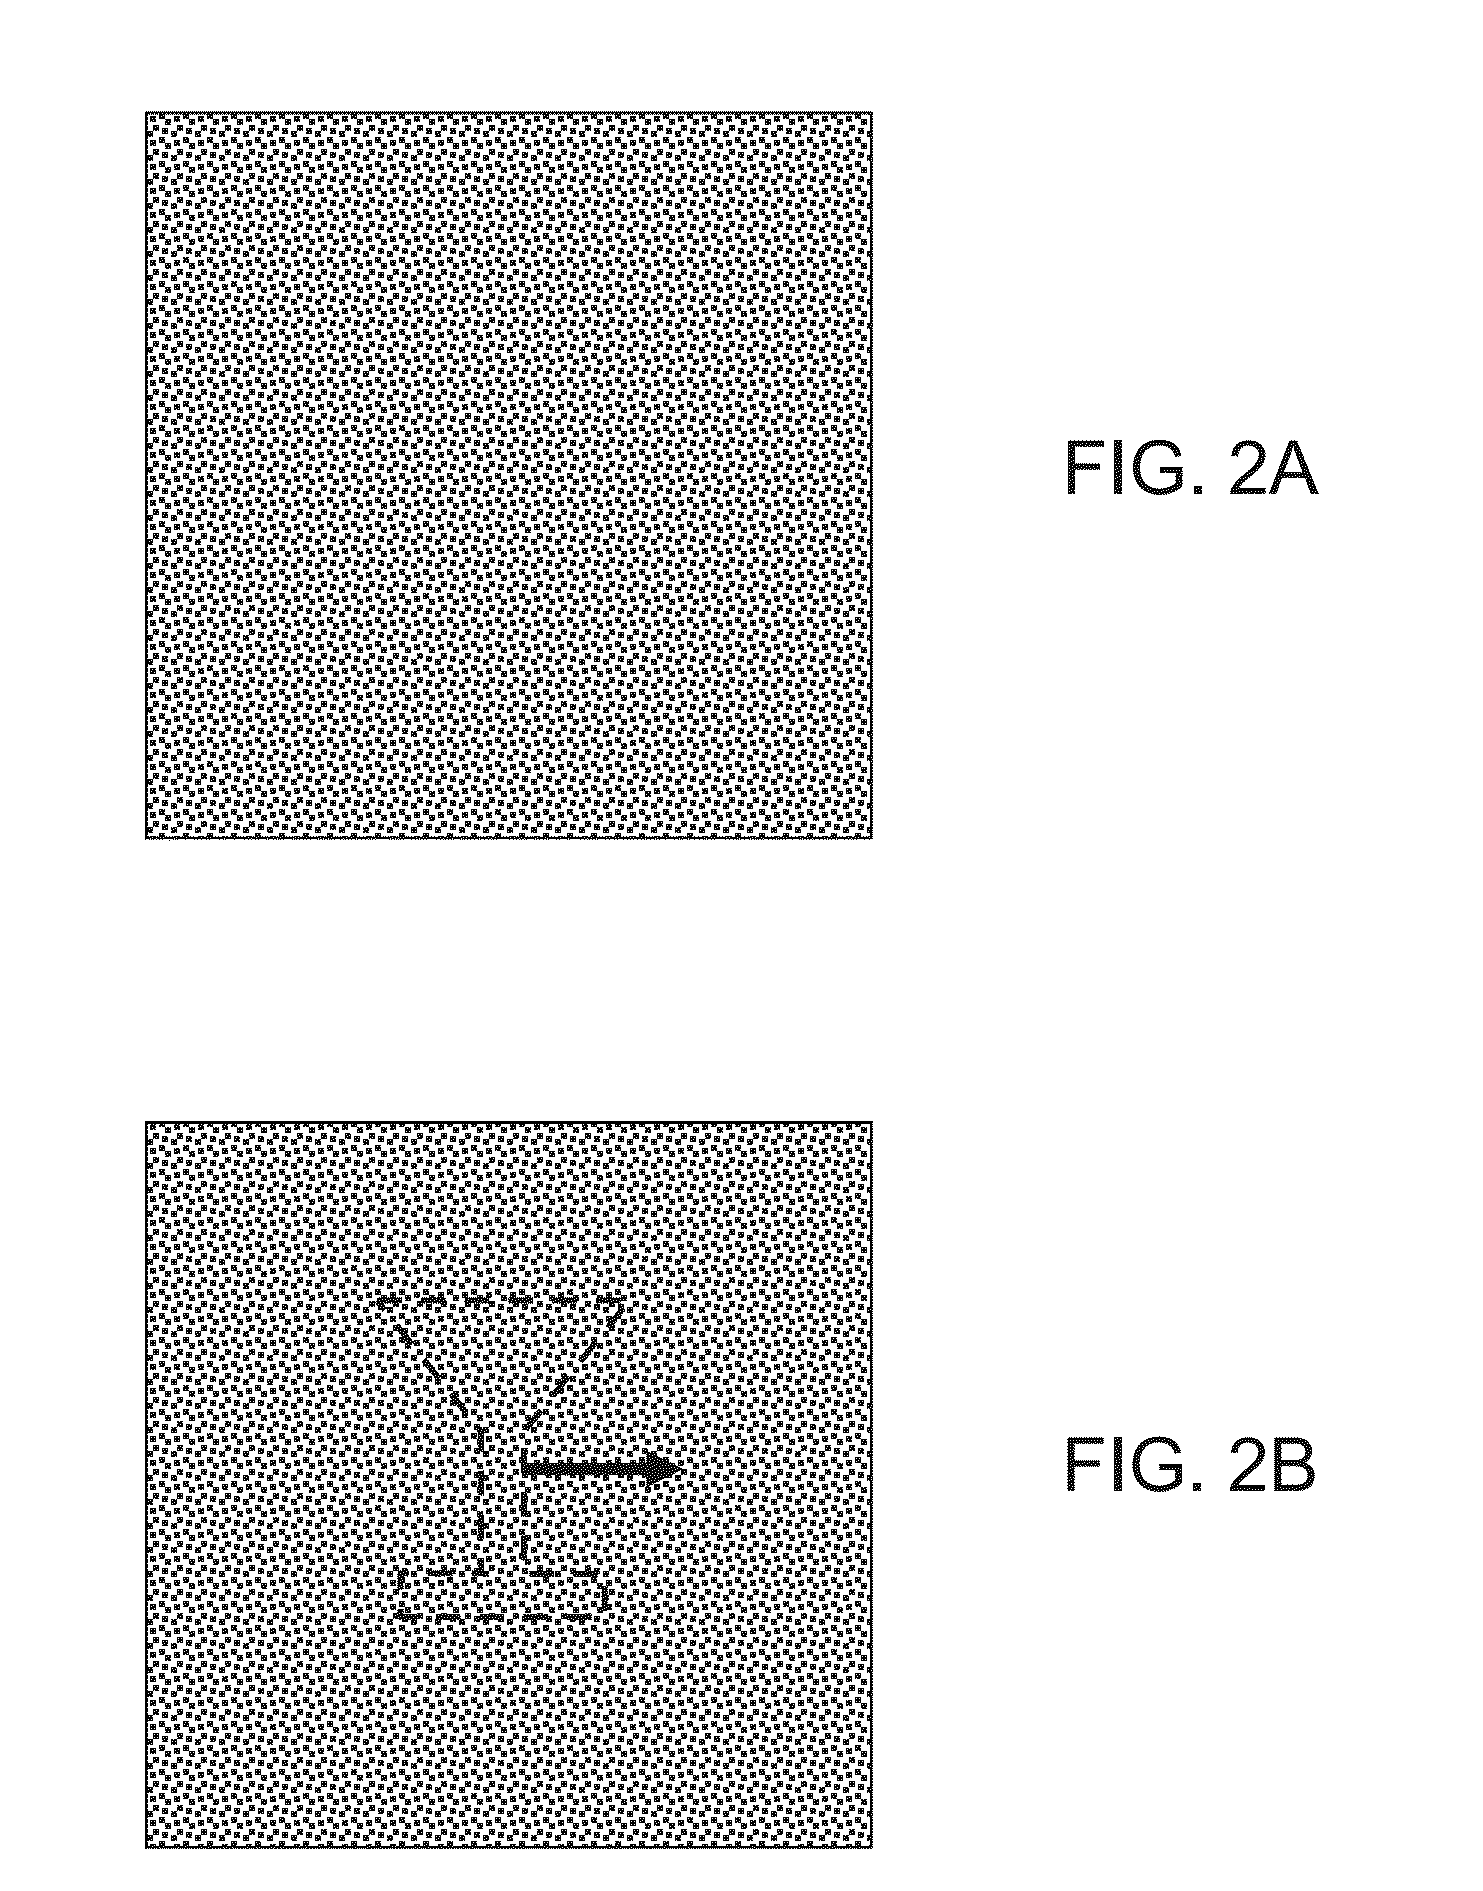 Method and system for assessing visual disorder